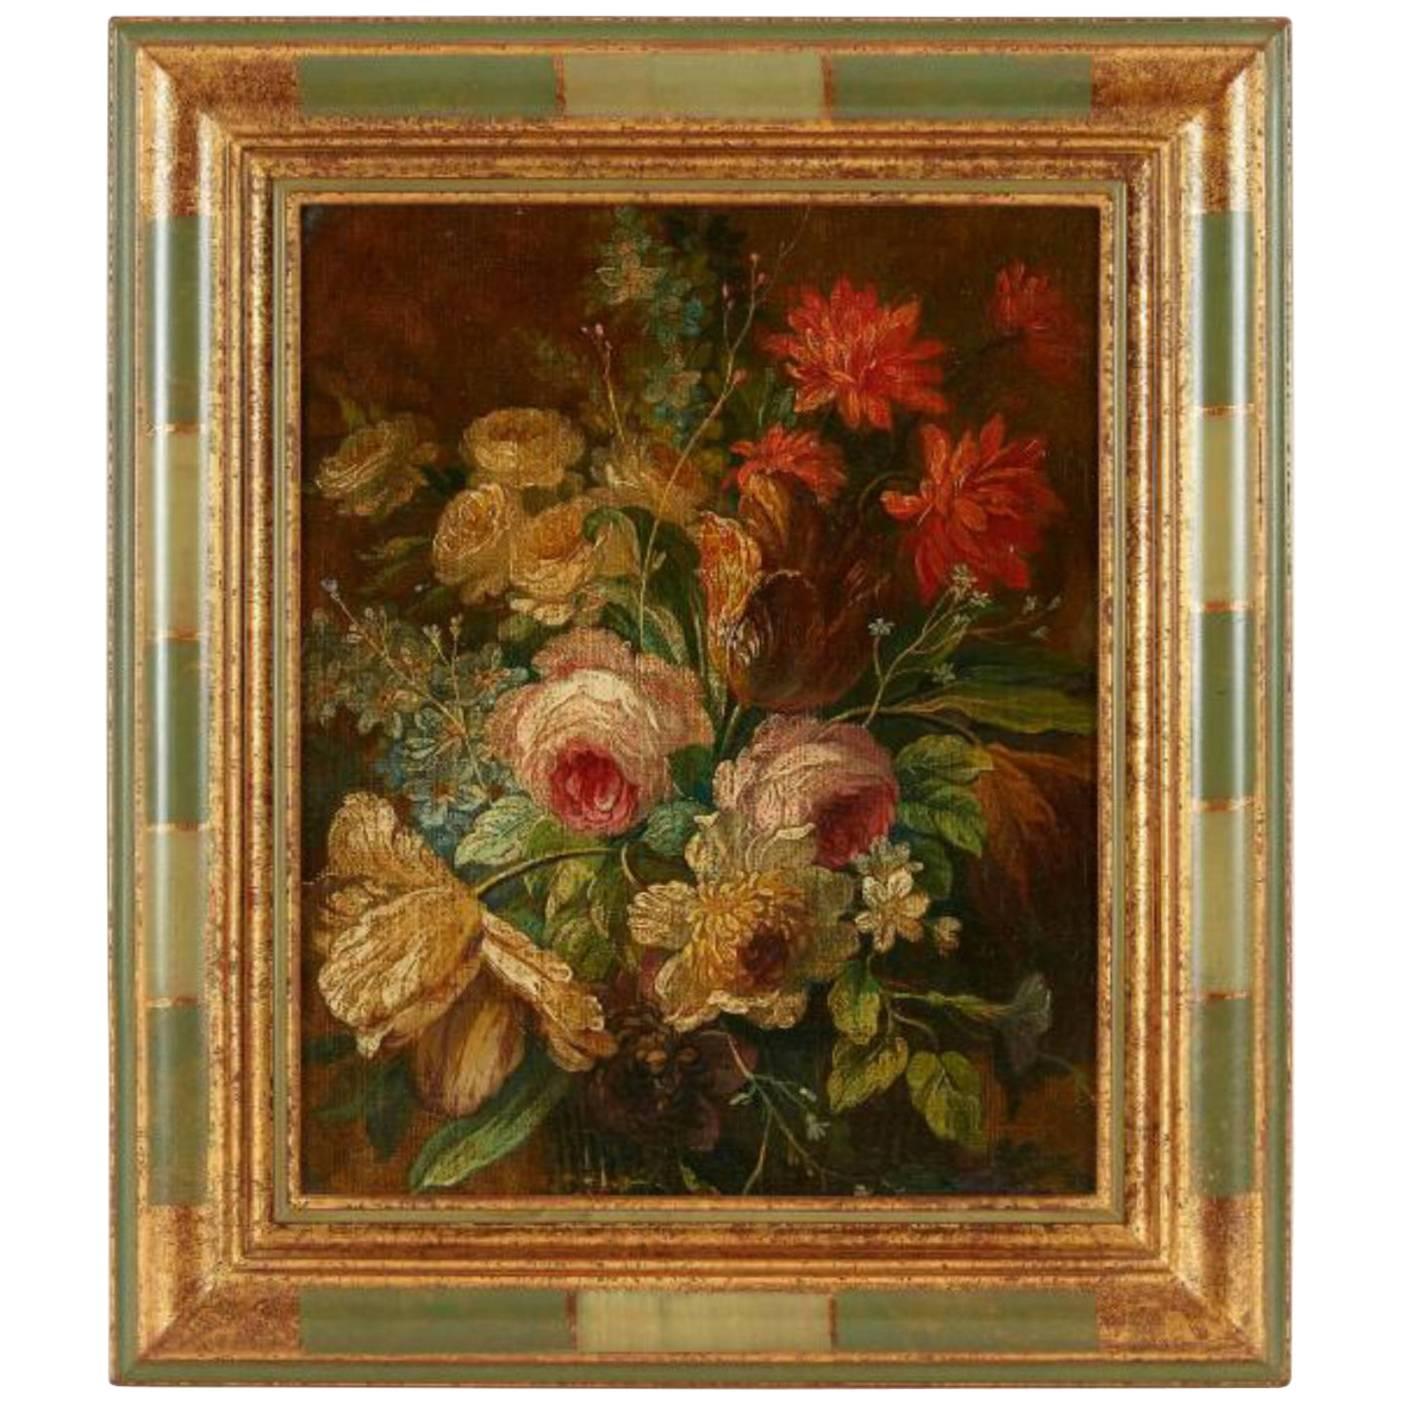 Late 19th Century French School Painting of Flowers, Oil on Canvas